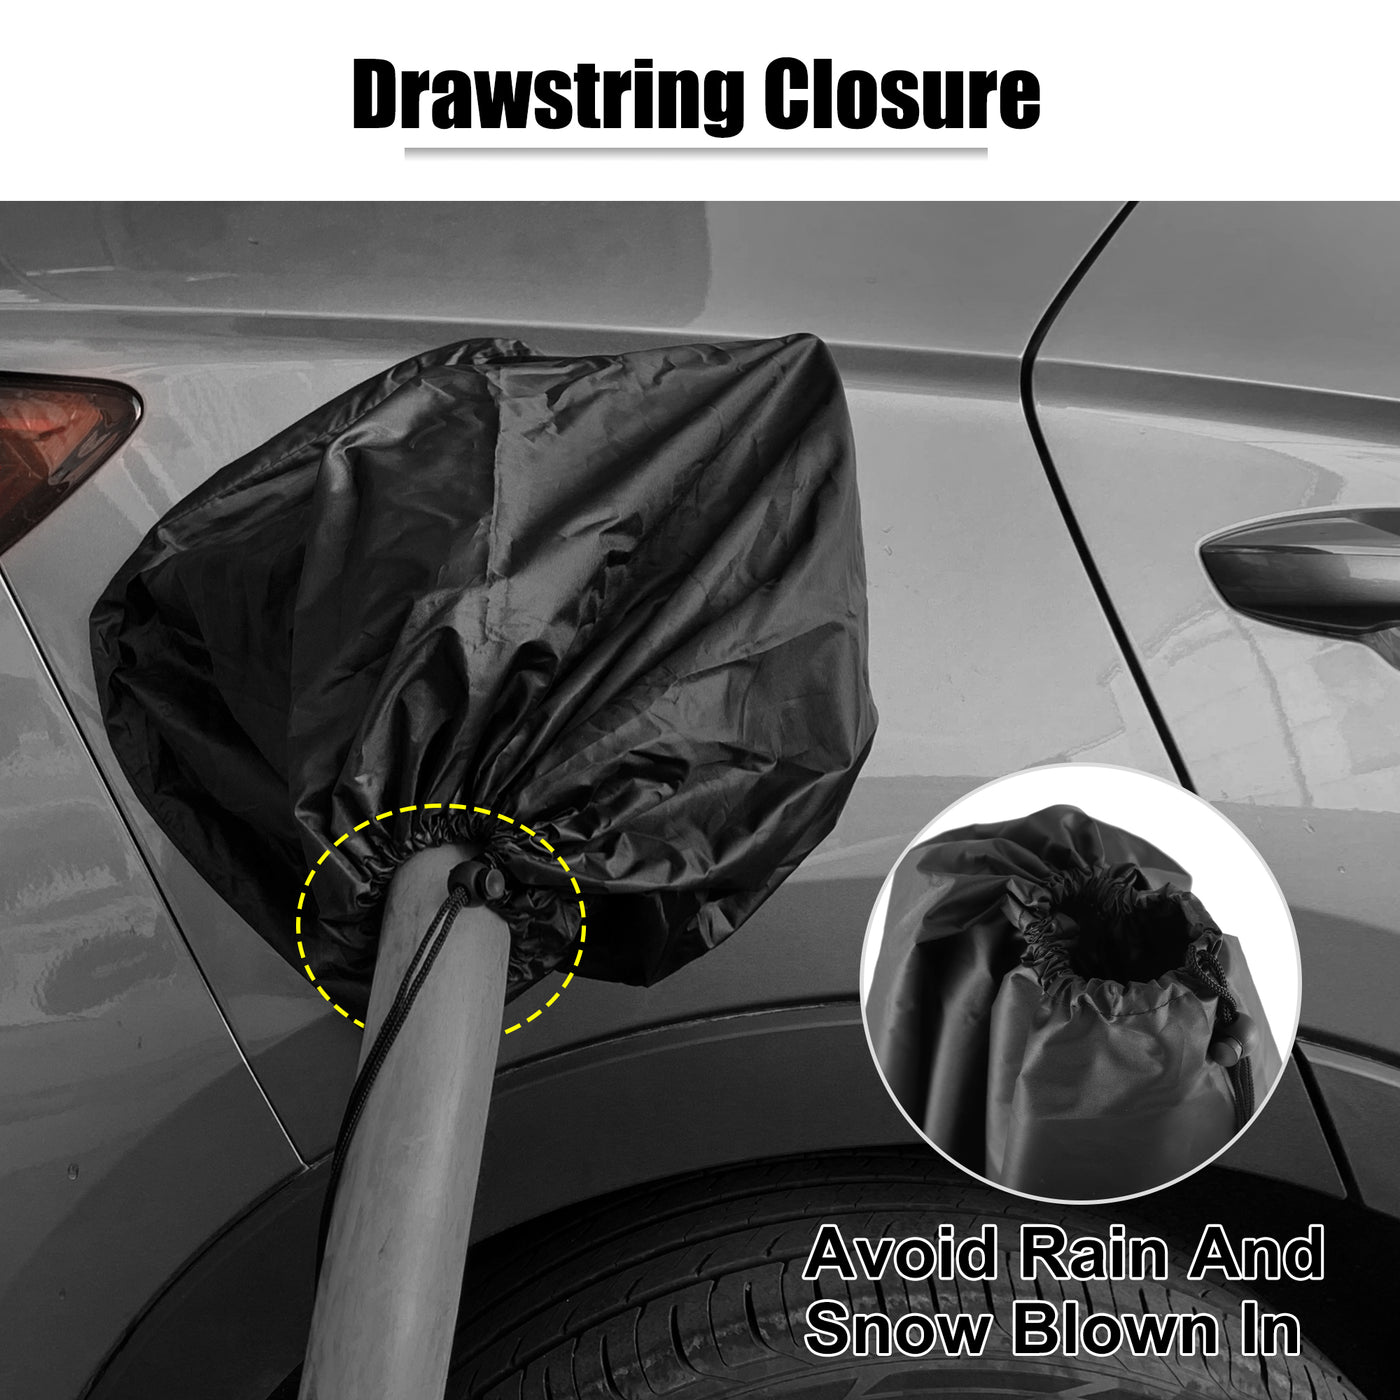 X AUTOHAUX EV Charger Plug Cover Waterproof Outdoor Electric Car Charging Port Cover with Magnetic Adhesion and Drawstring Closure All Weather Protection Black